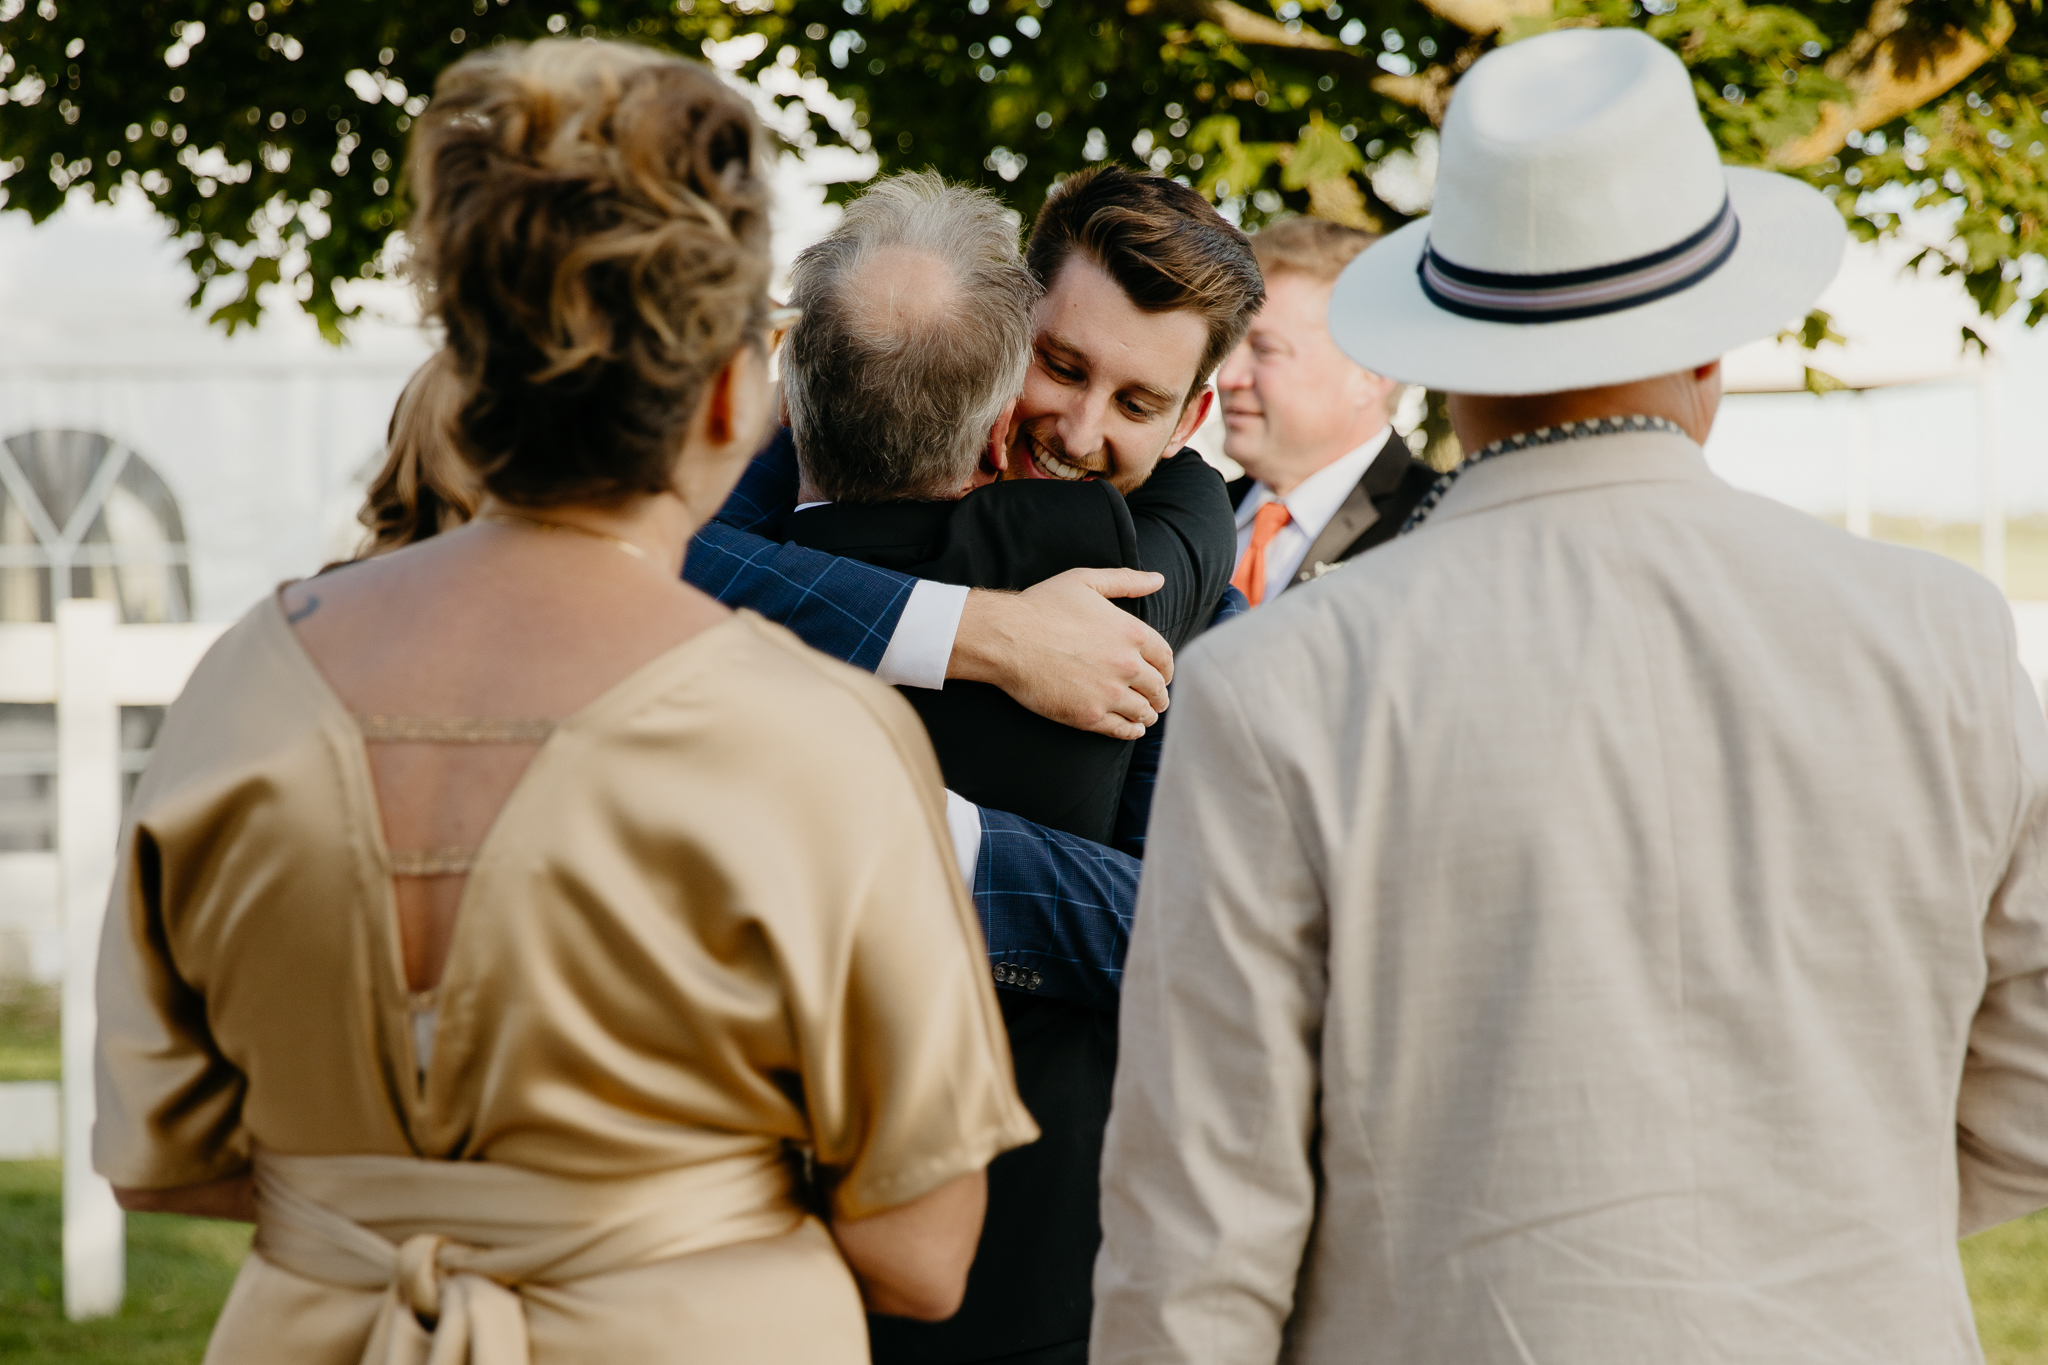 Wedding guests hugging each other and bride and groom after an outdoor wedding ceremony at Northfork Farm